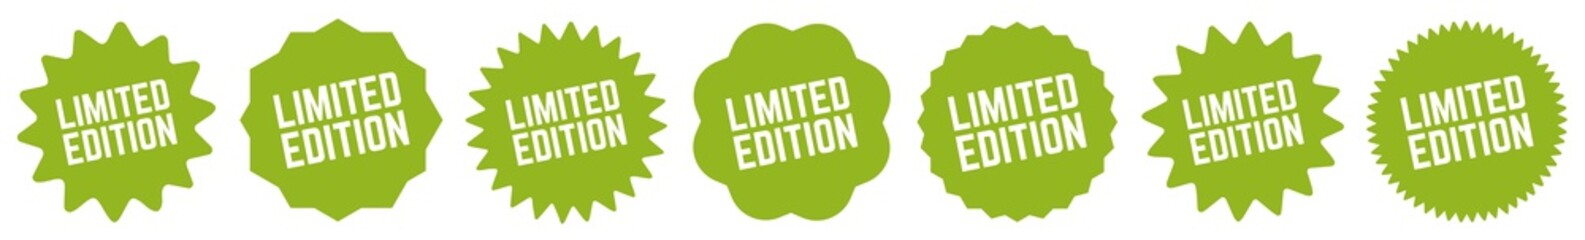 Limited Edition Tag Green Eco | Special Offer Icon | Sale Sticker | Deal Label | Variations